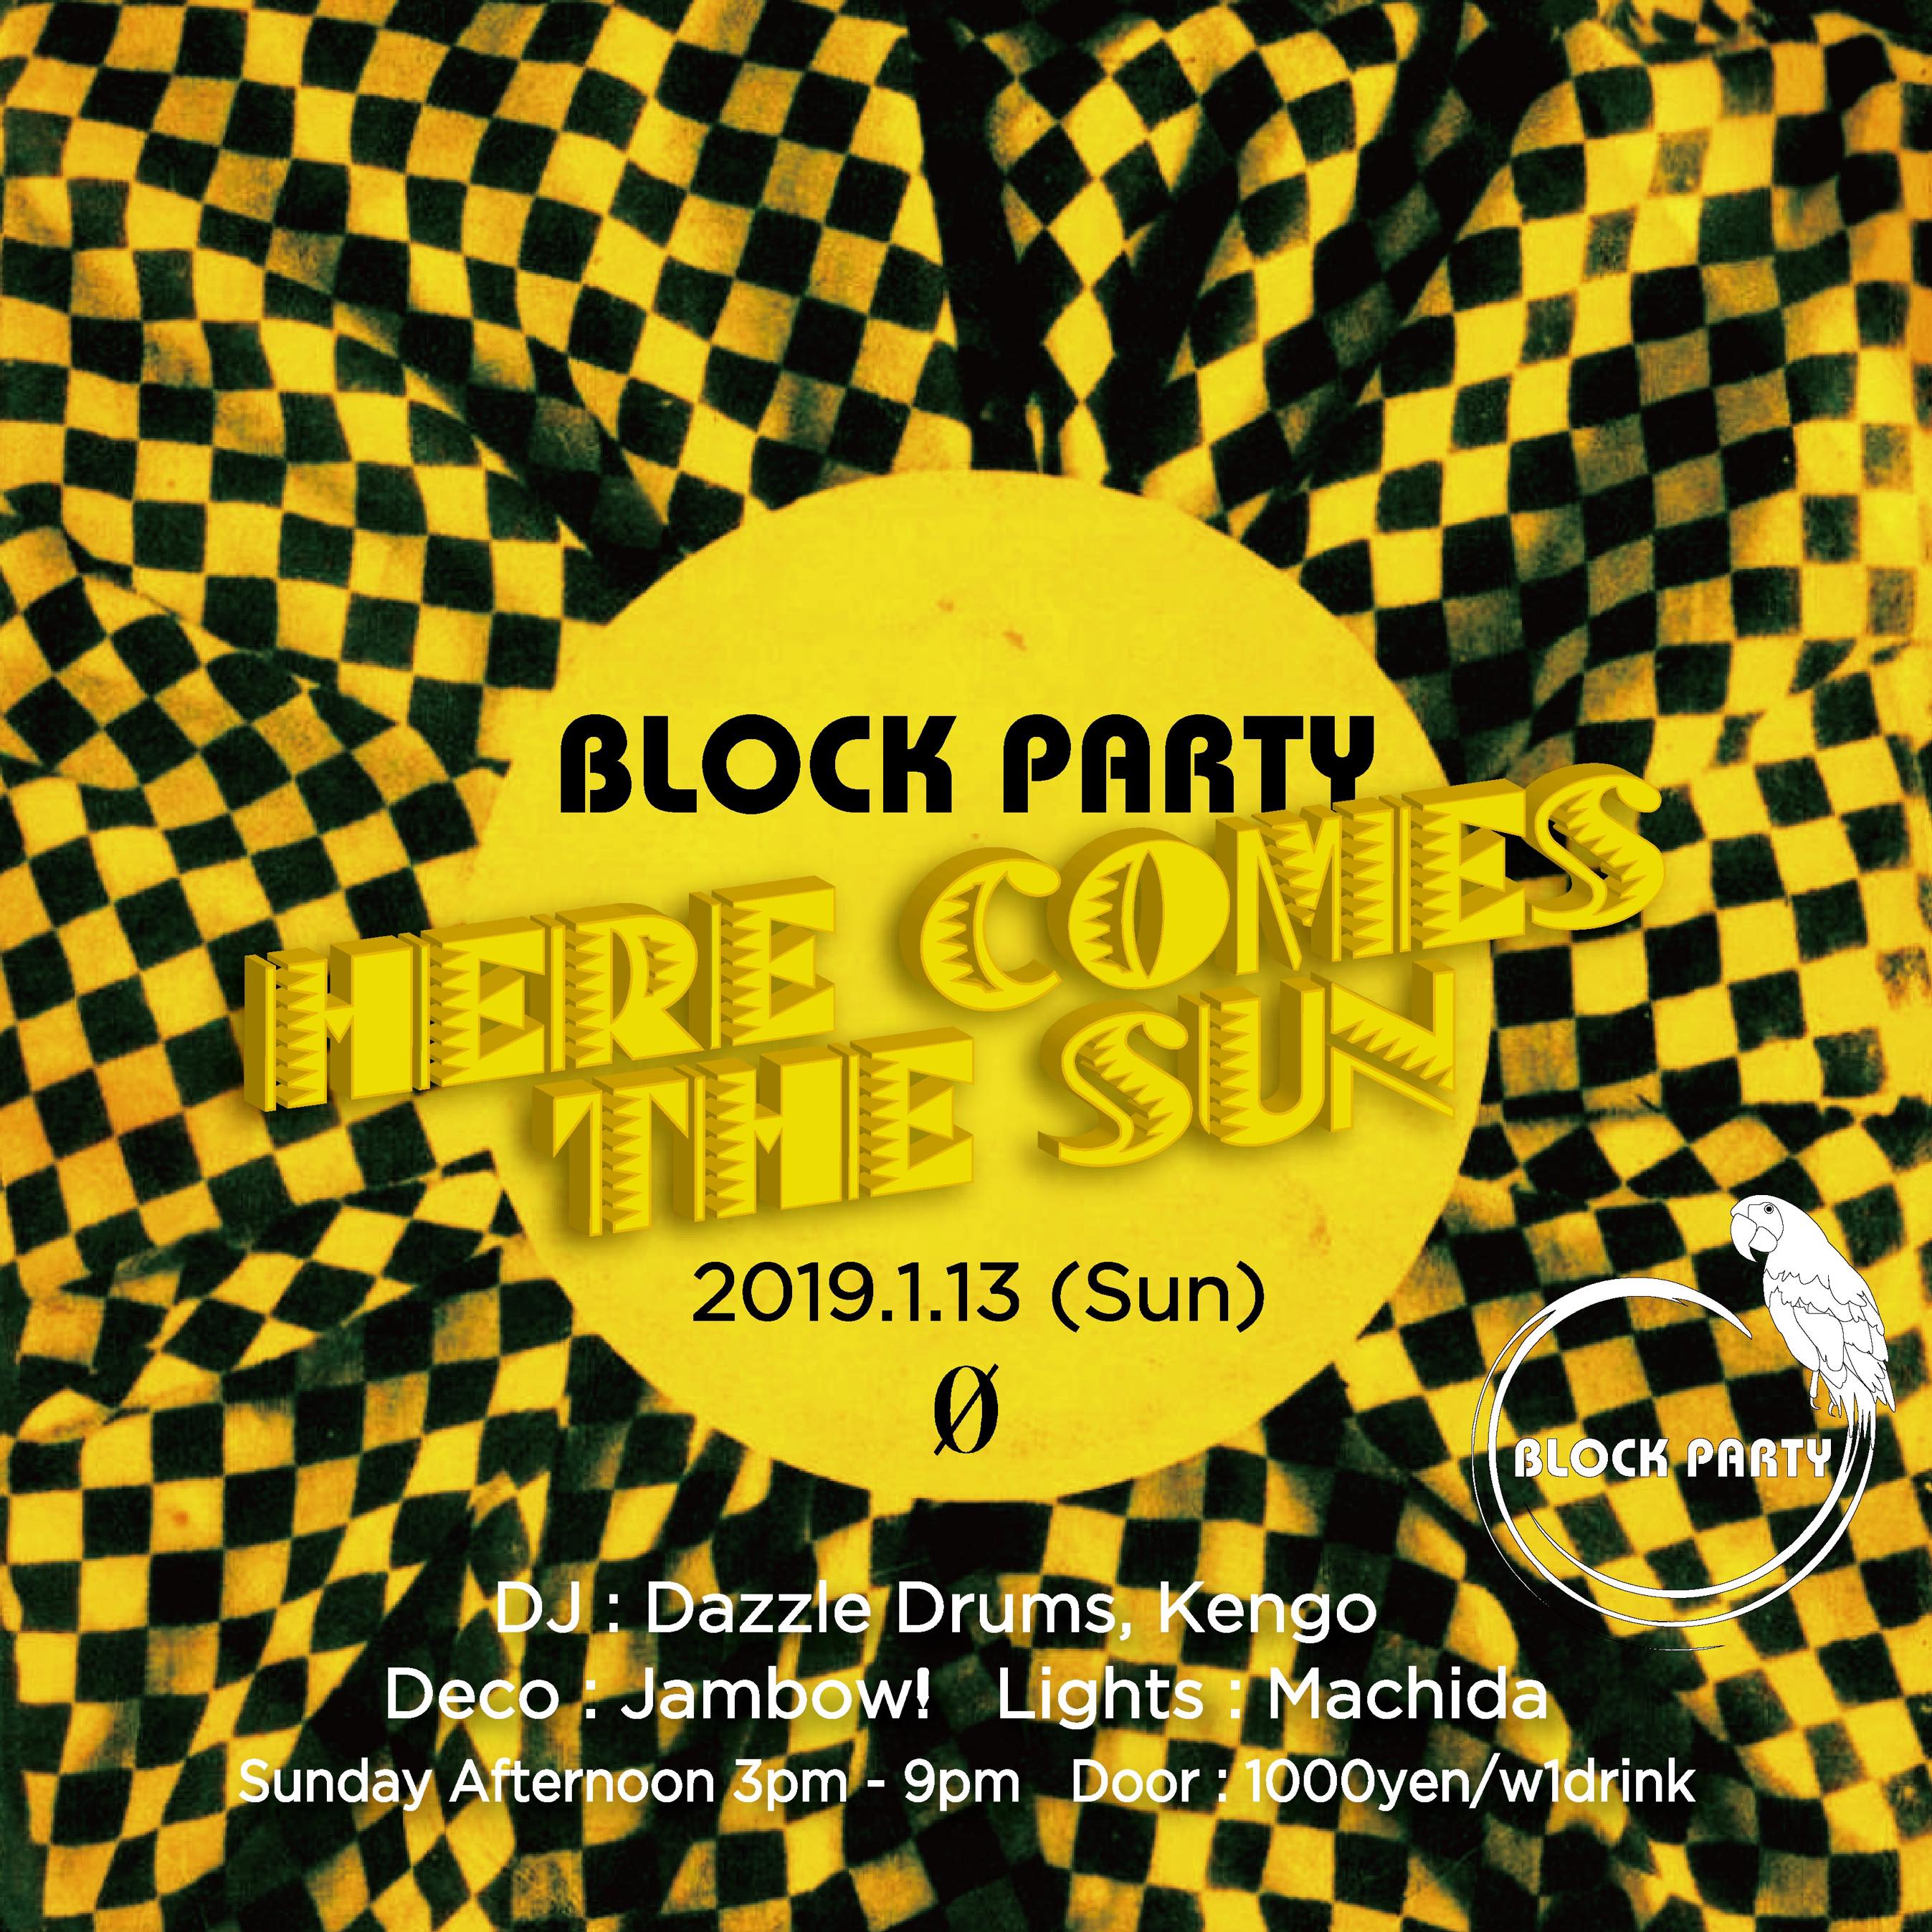 Block Party “Here Comes The Sun”